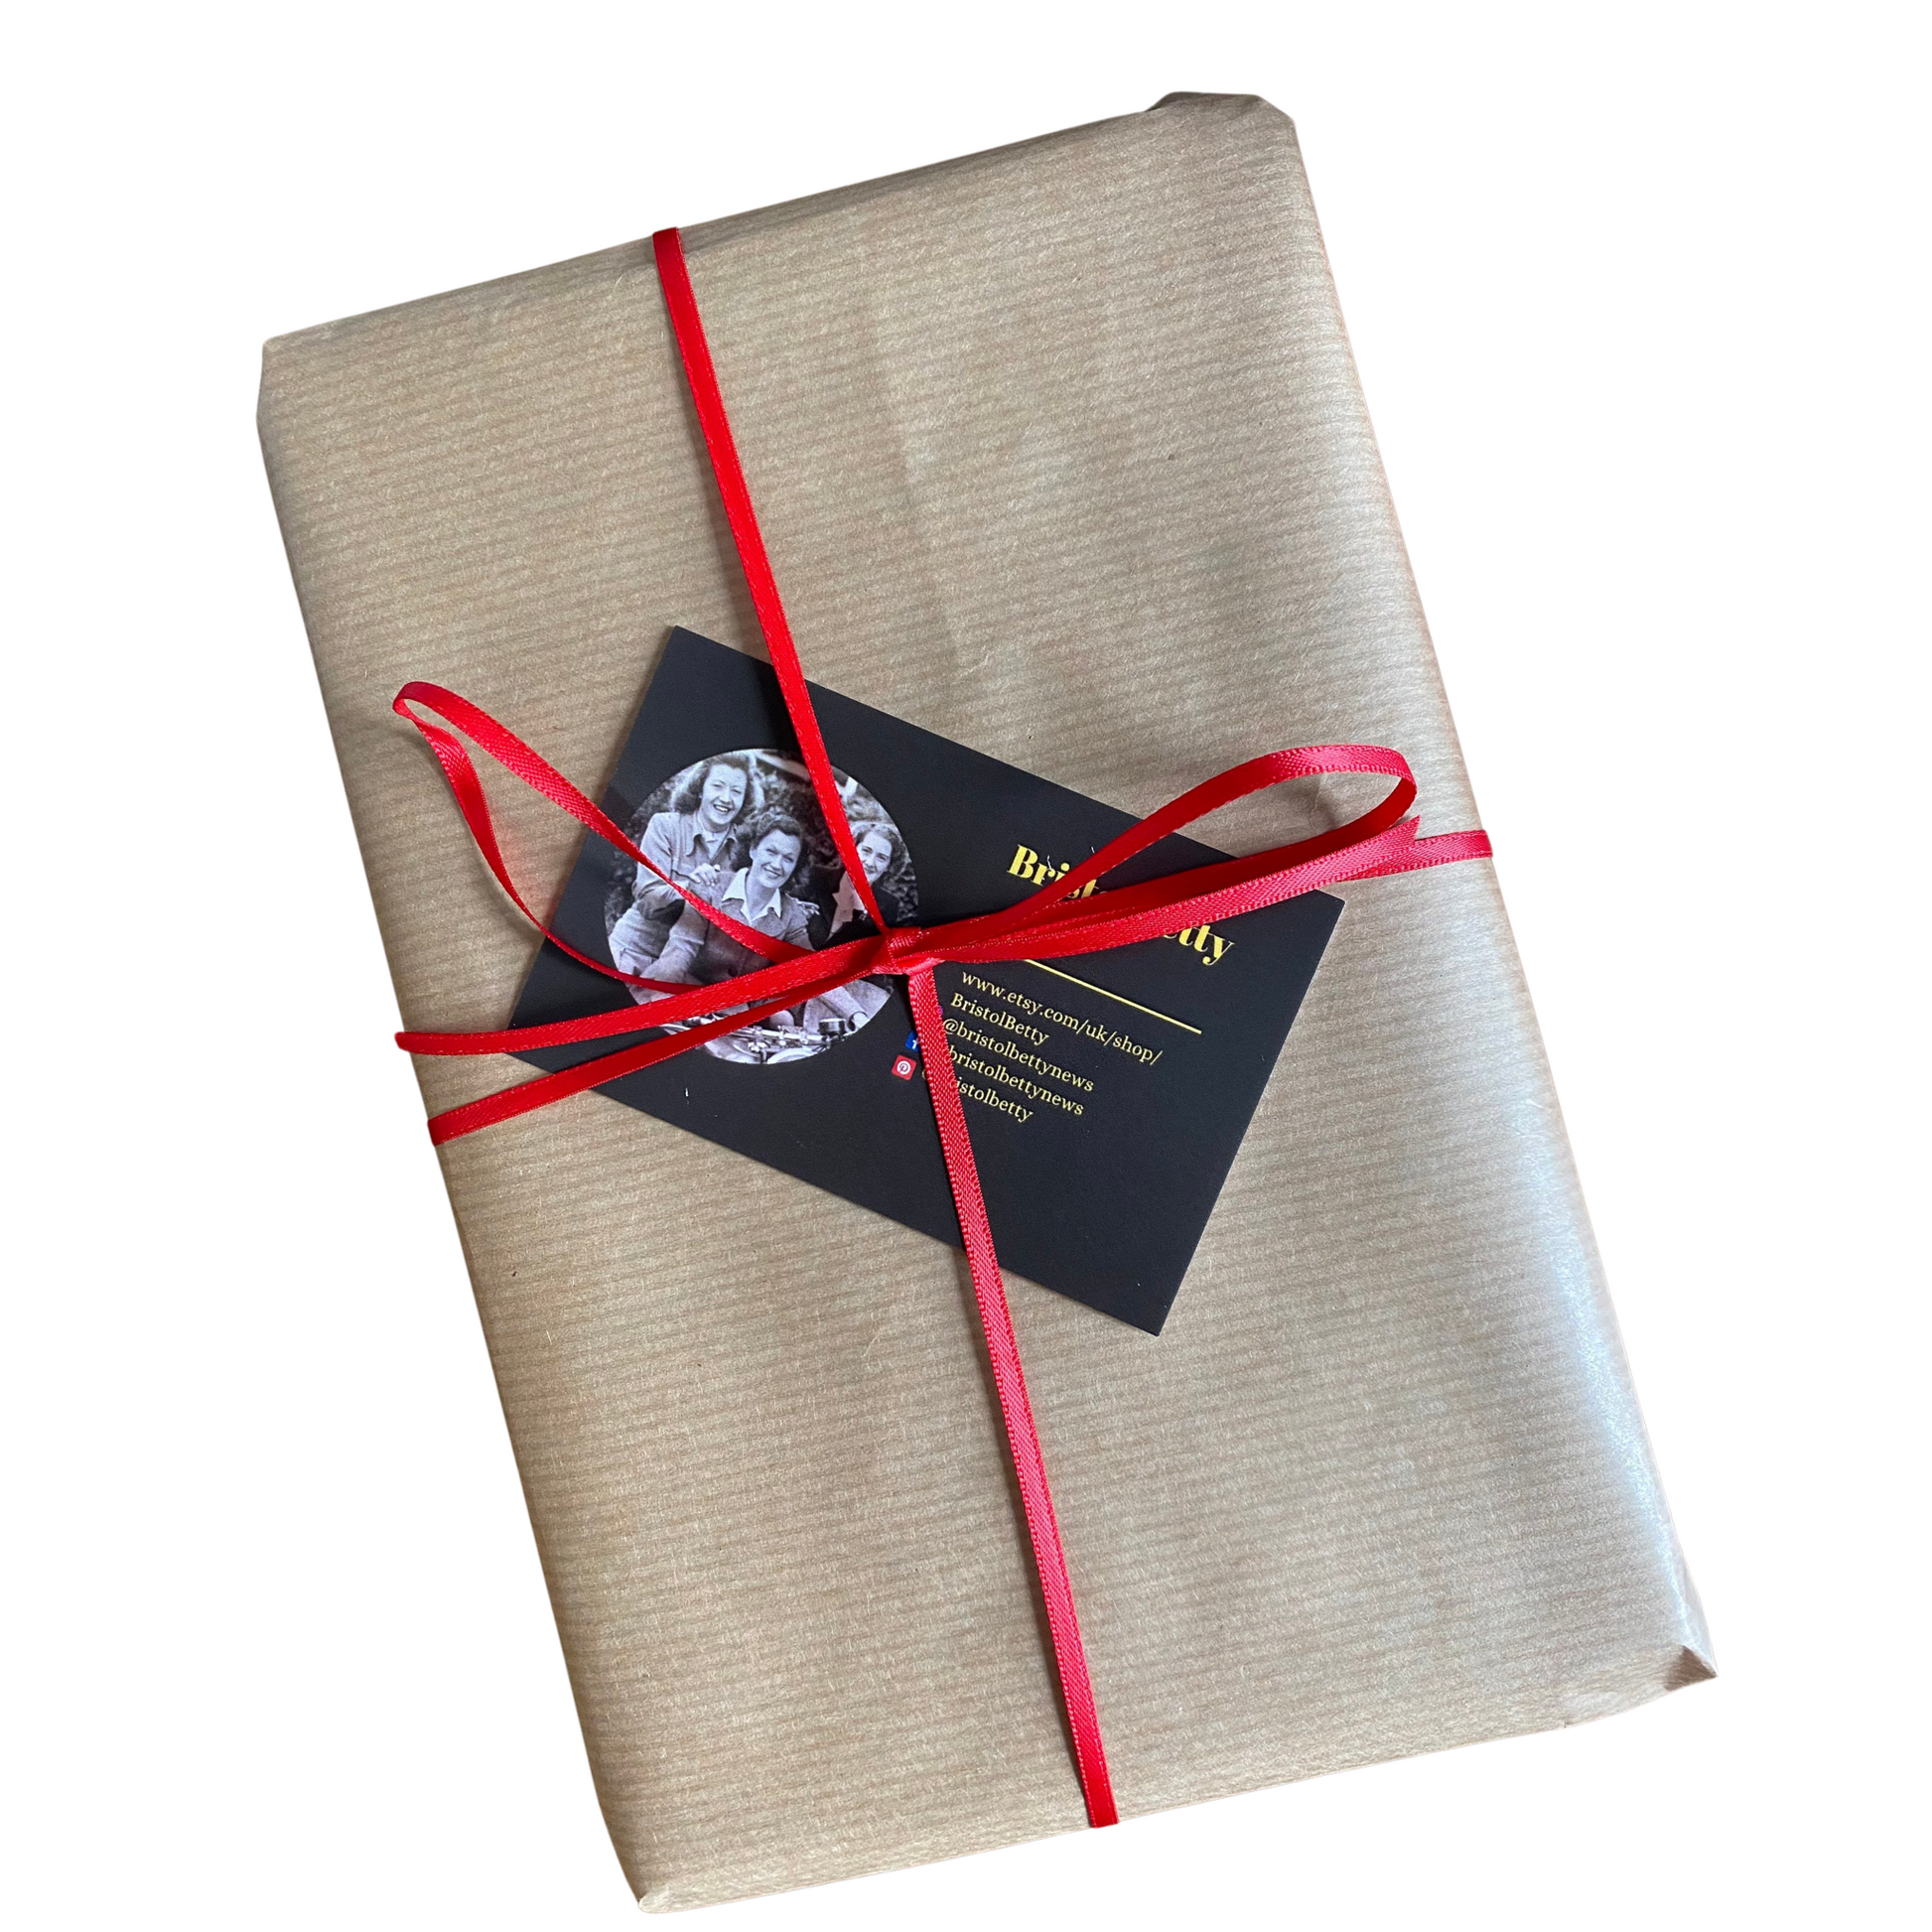 All orders are wrapped in Kraft paper and ribbon 